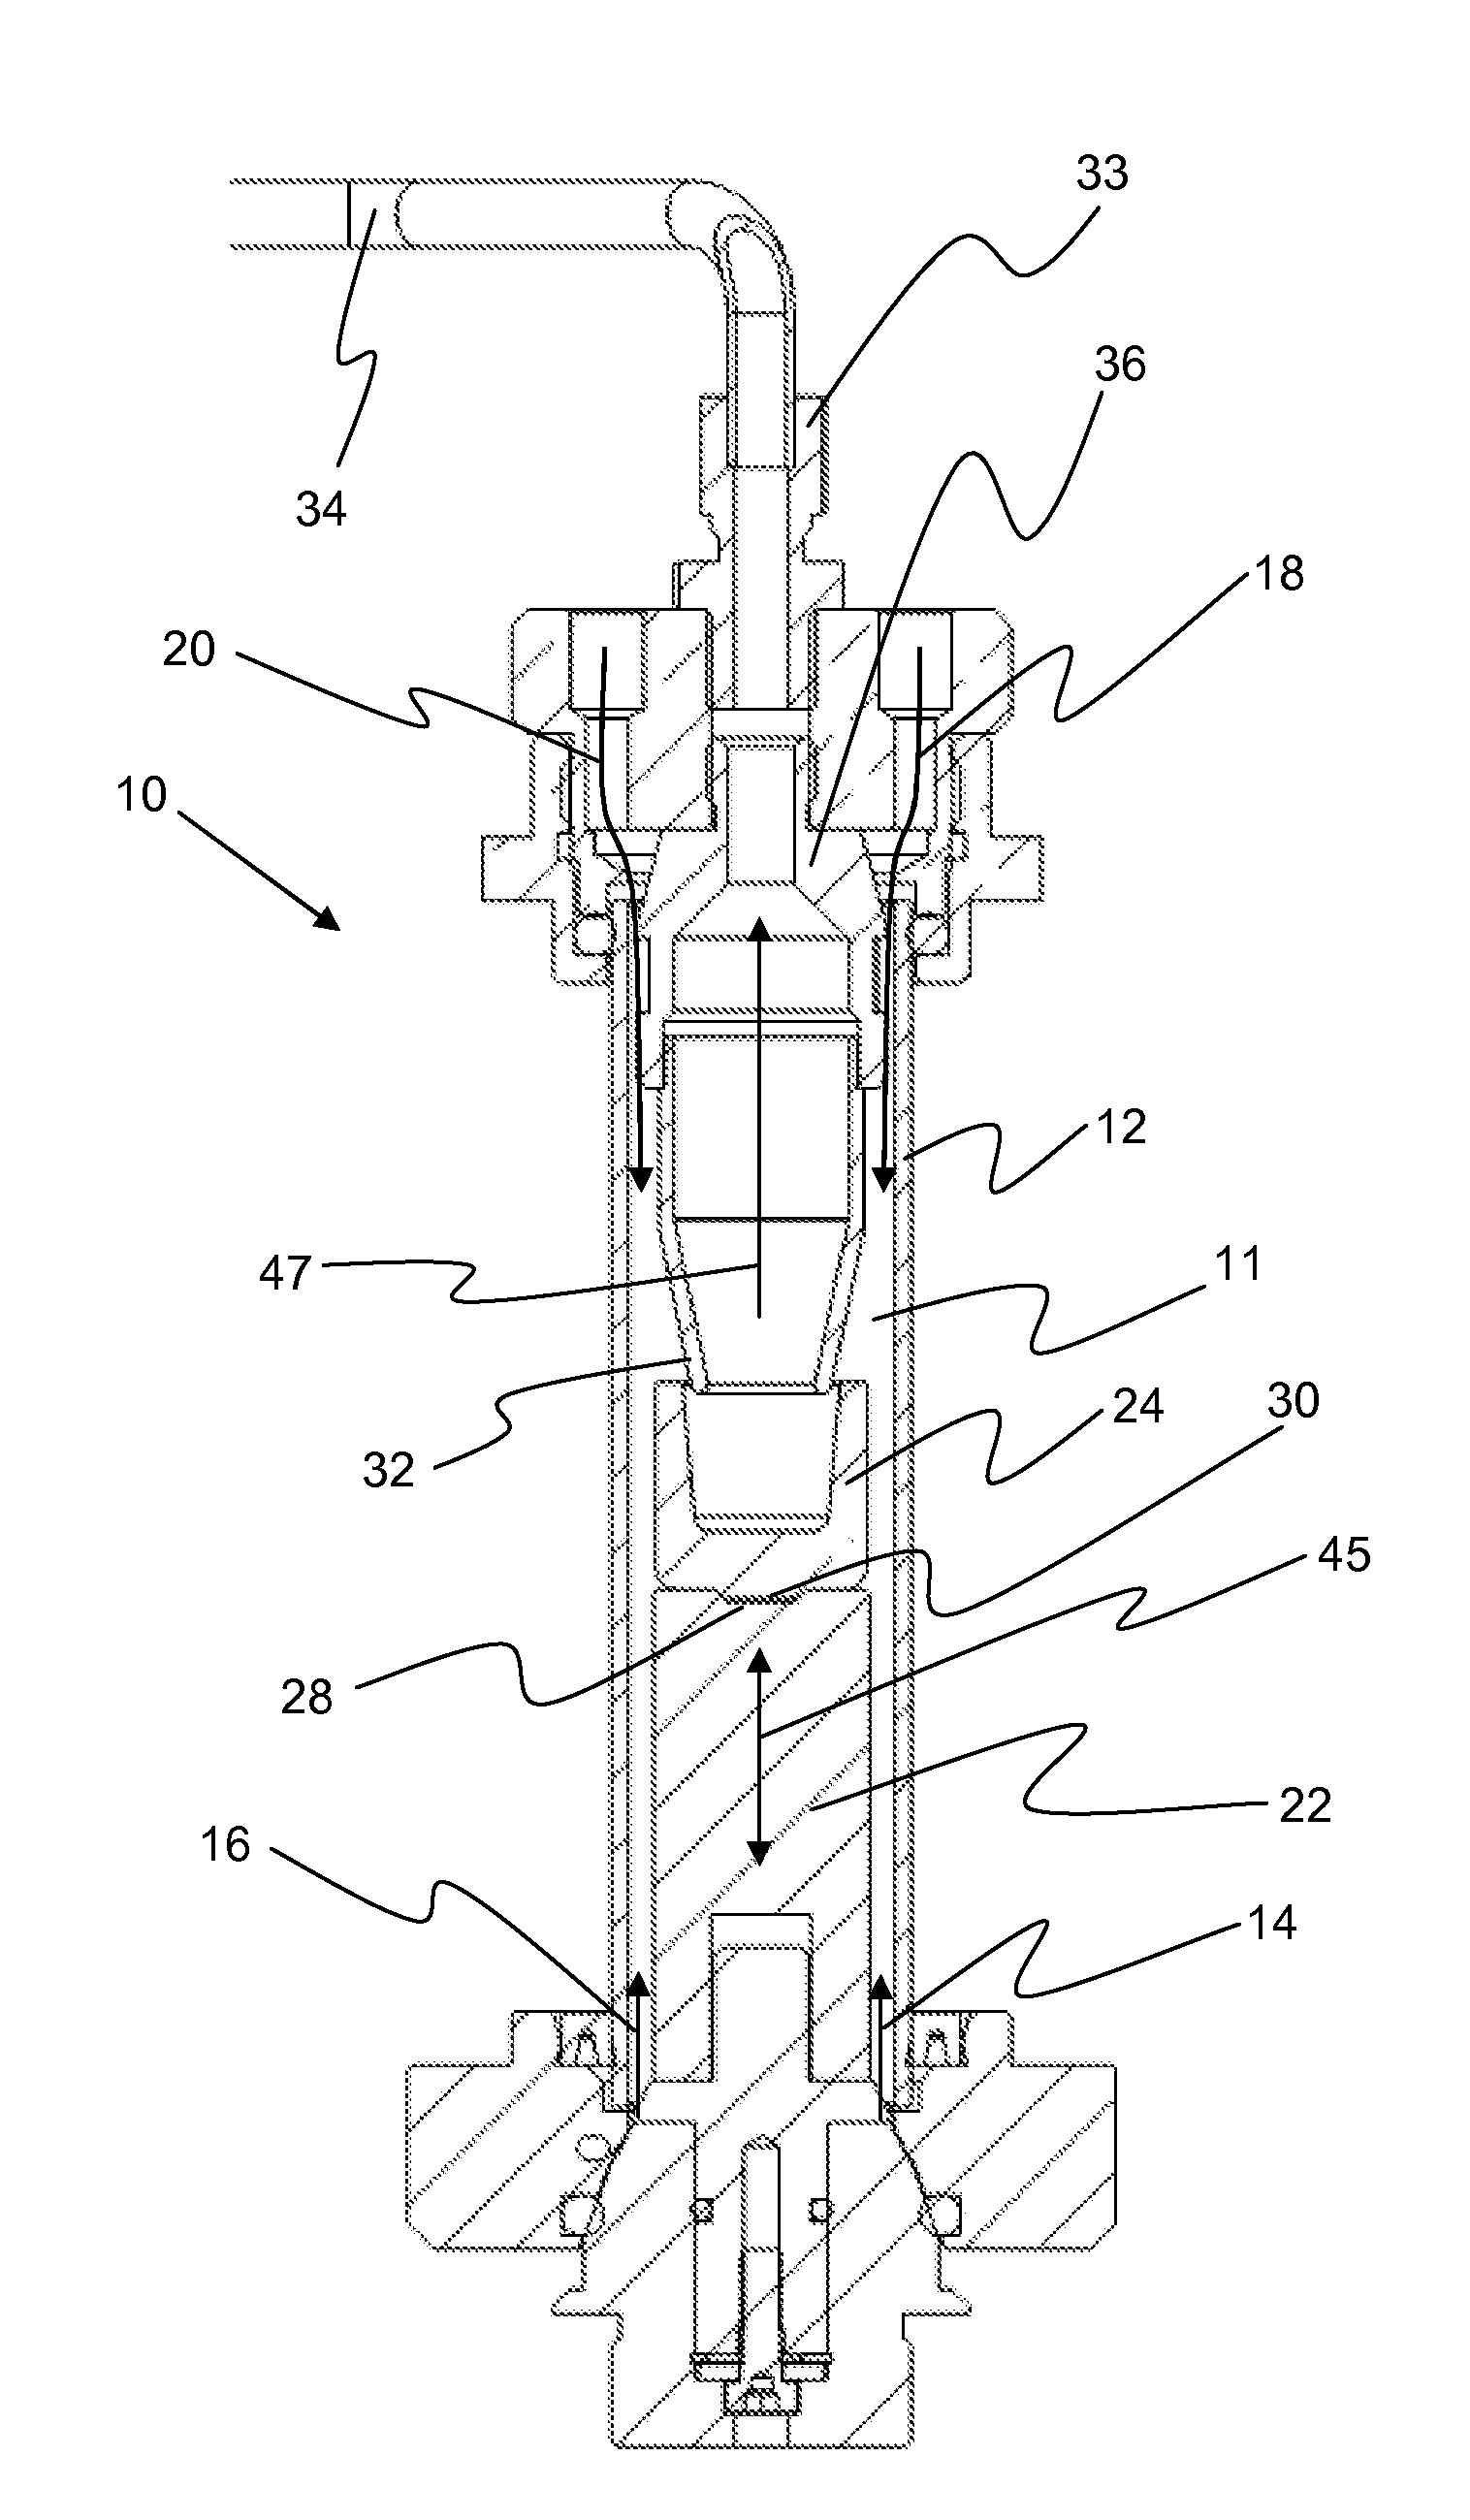 Device and method for combustion analysis by means of induction furnaces and protective element for induction furnaces for the combustion analysis